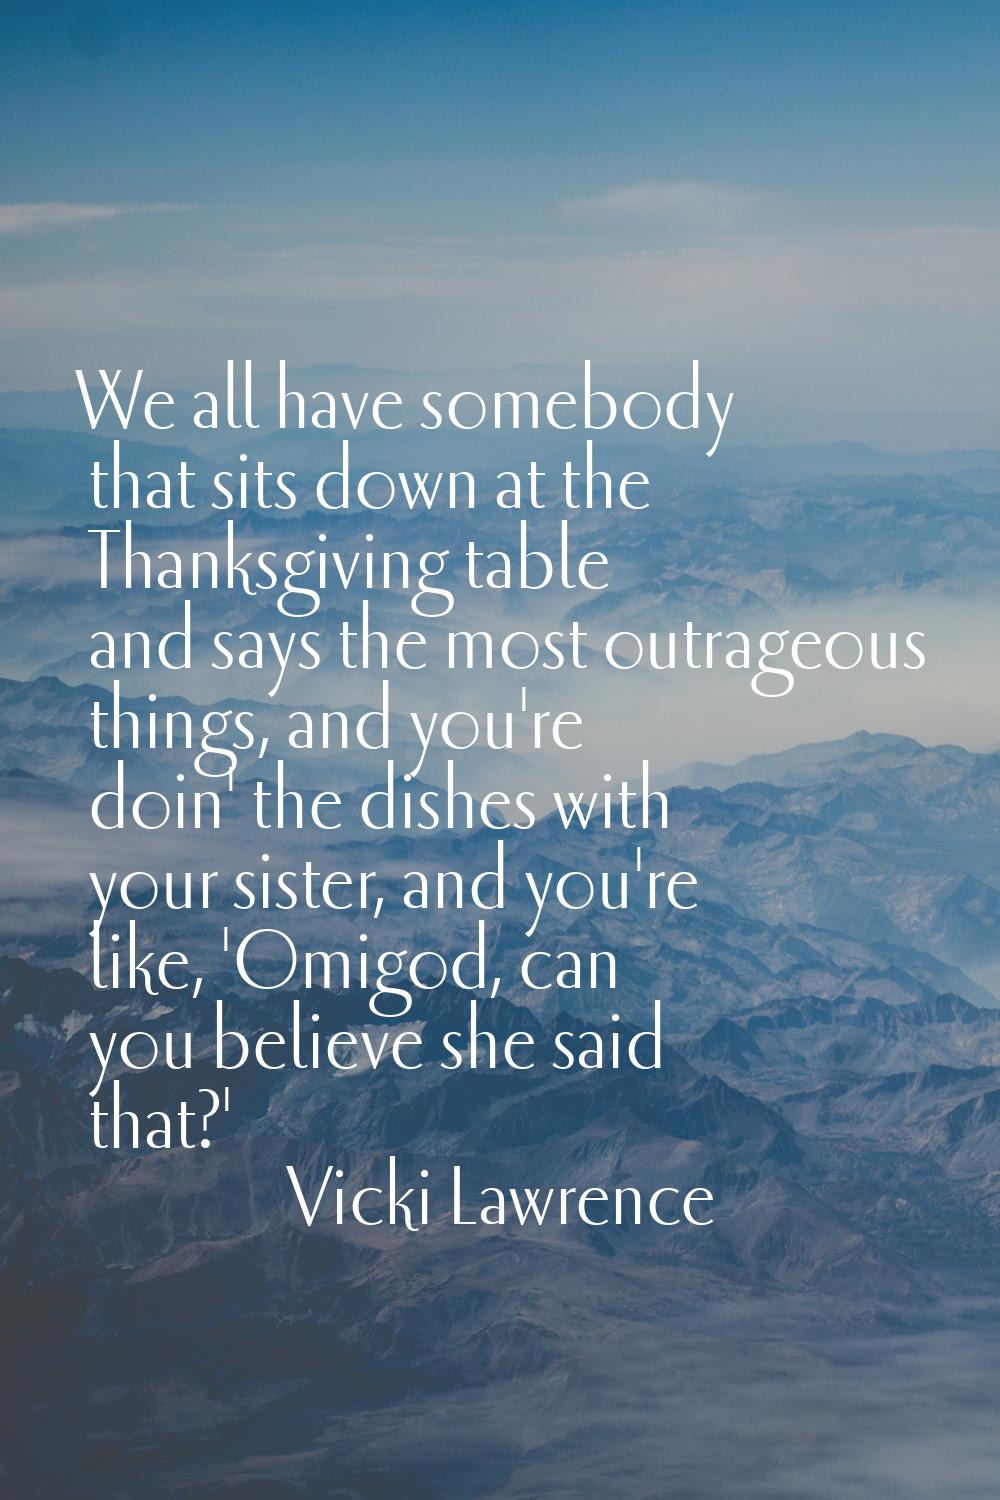 We all have somebody that sits down at the Thanksgiving table and says the most outrageous things, 